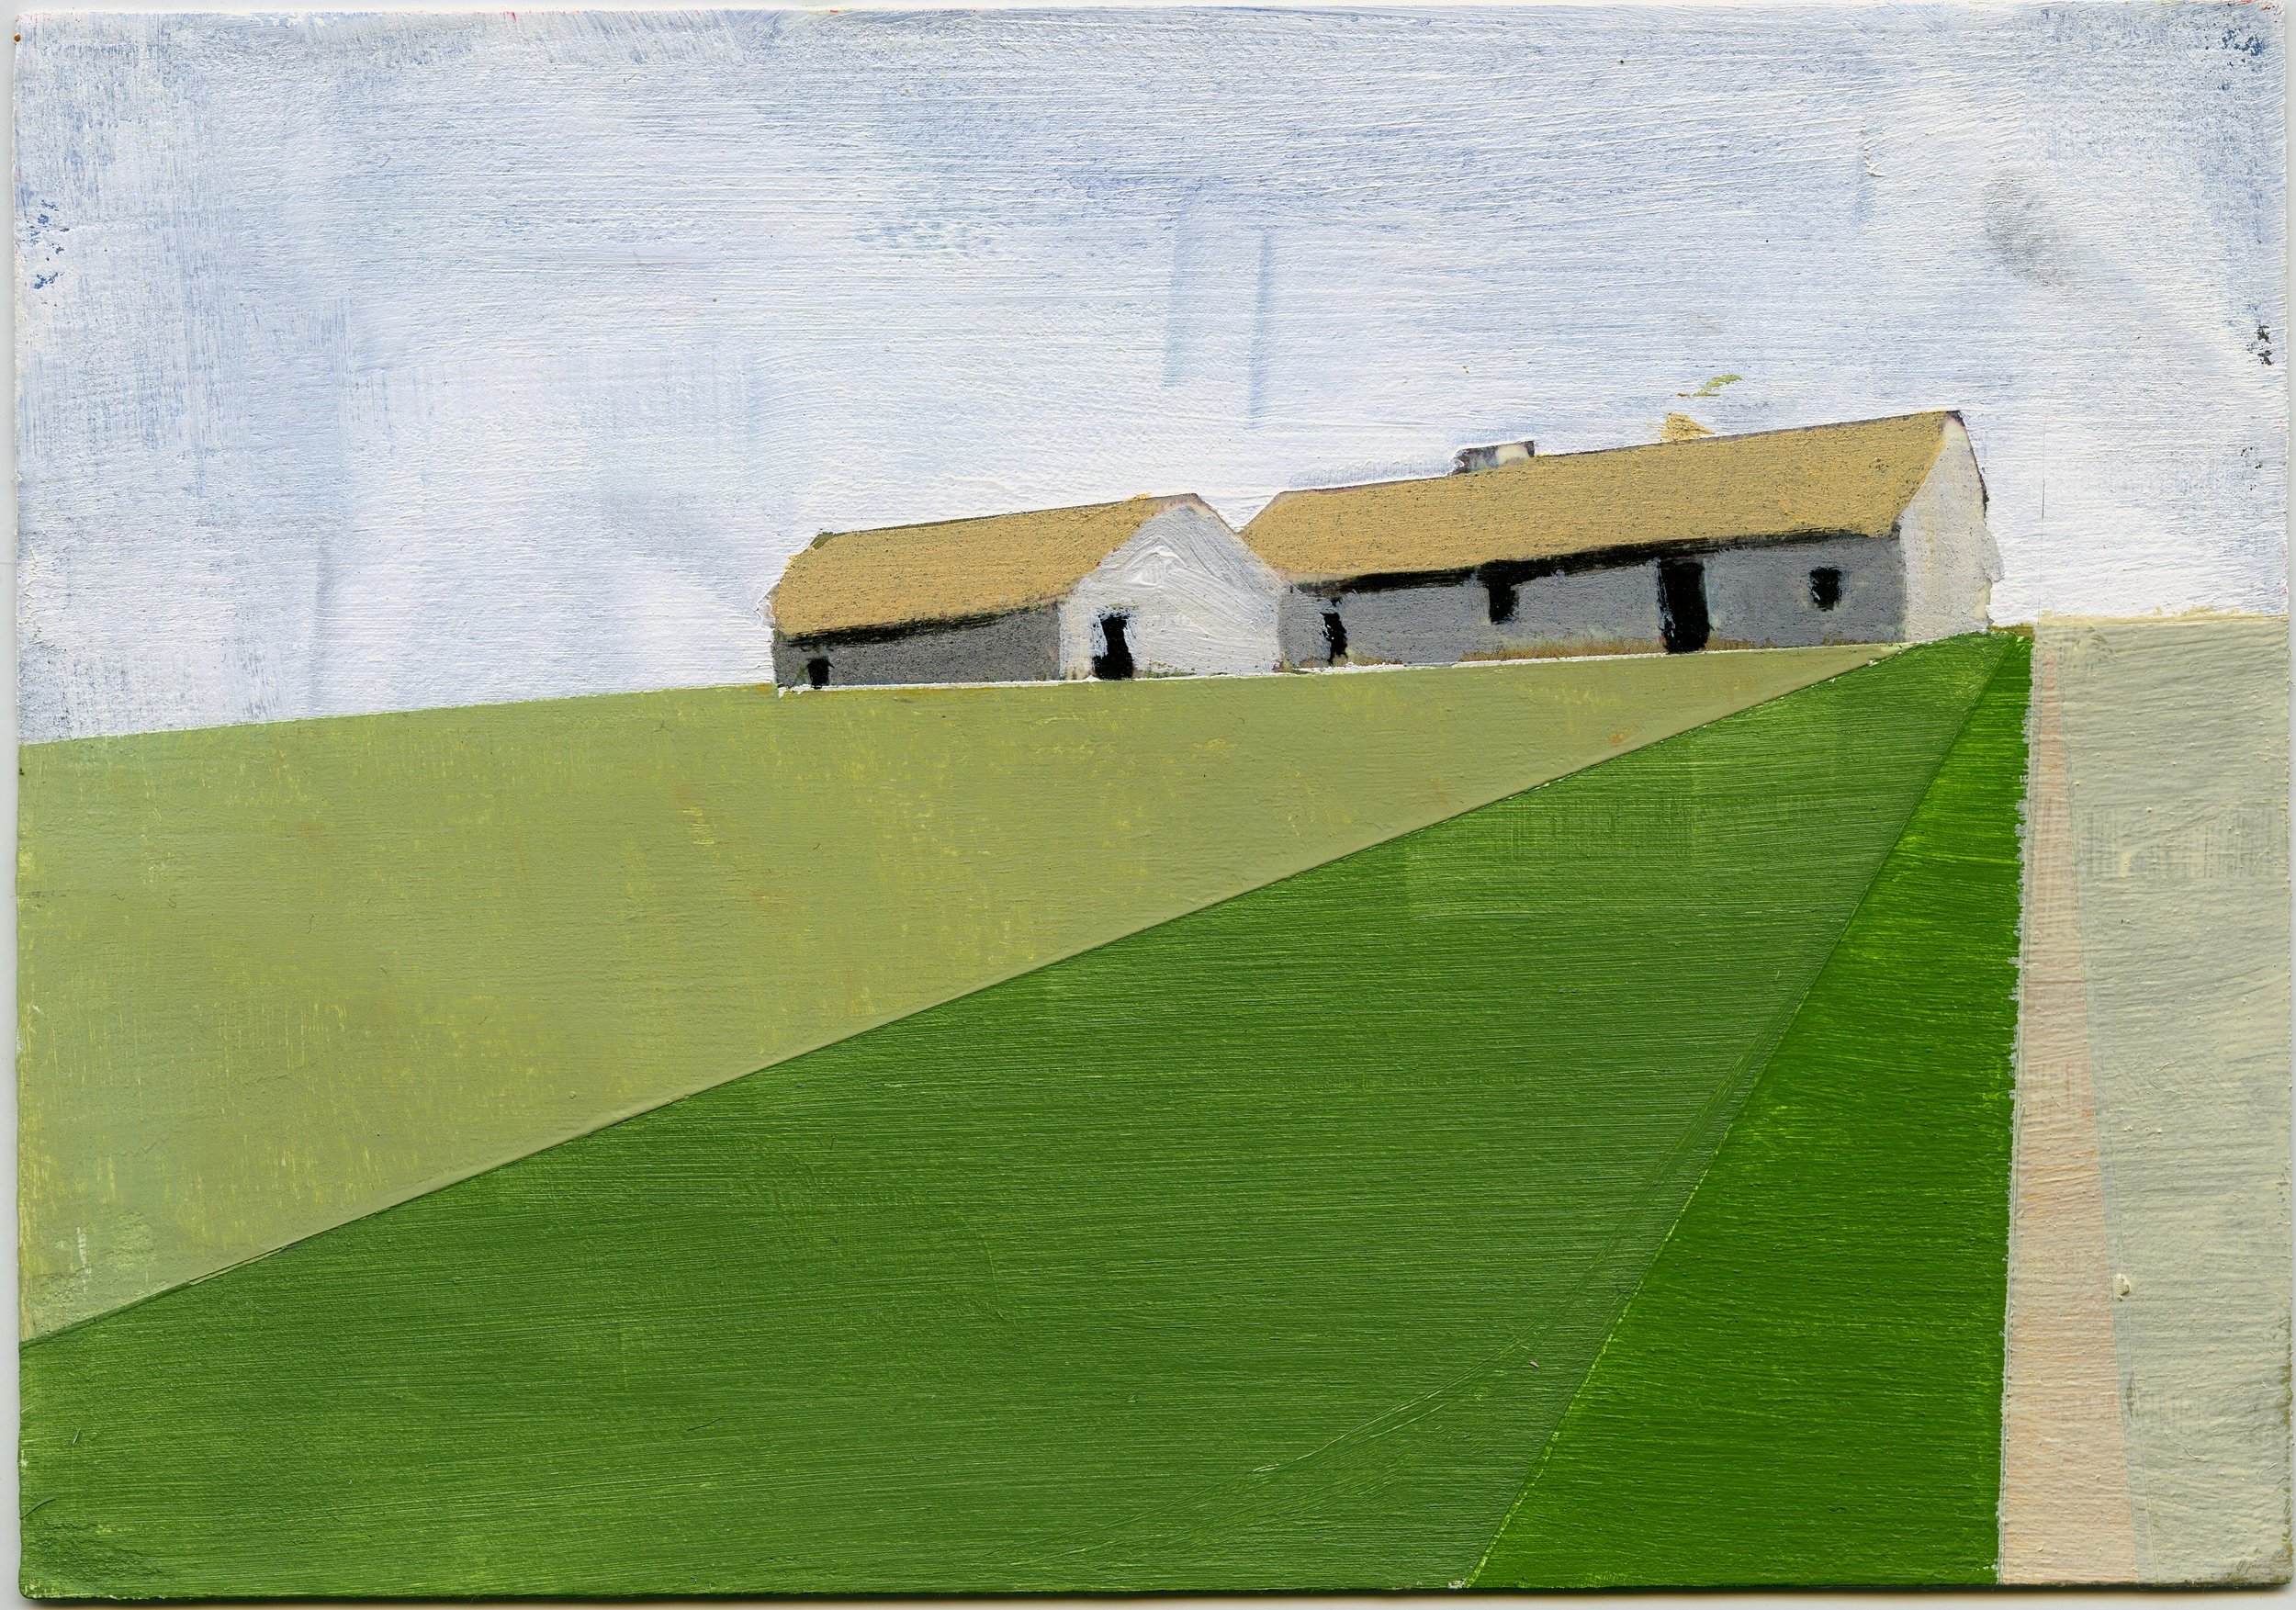   BILLET-DOUX: IRELAND    4.5”x6” | Clear acrylic gesso and oil on postcard | 2014    